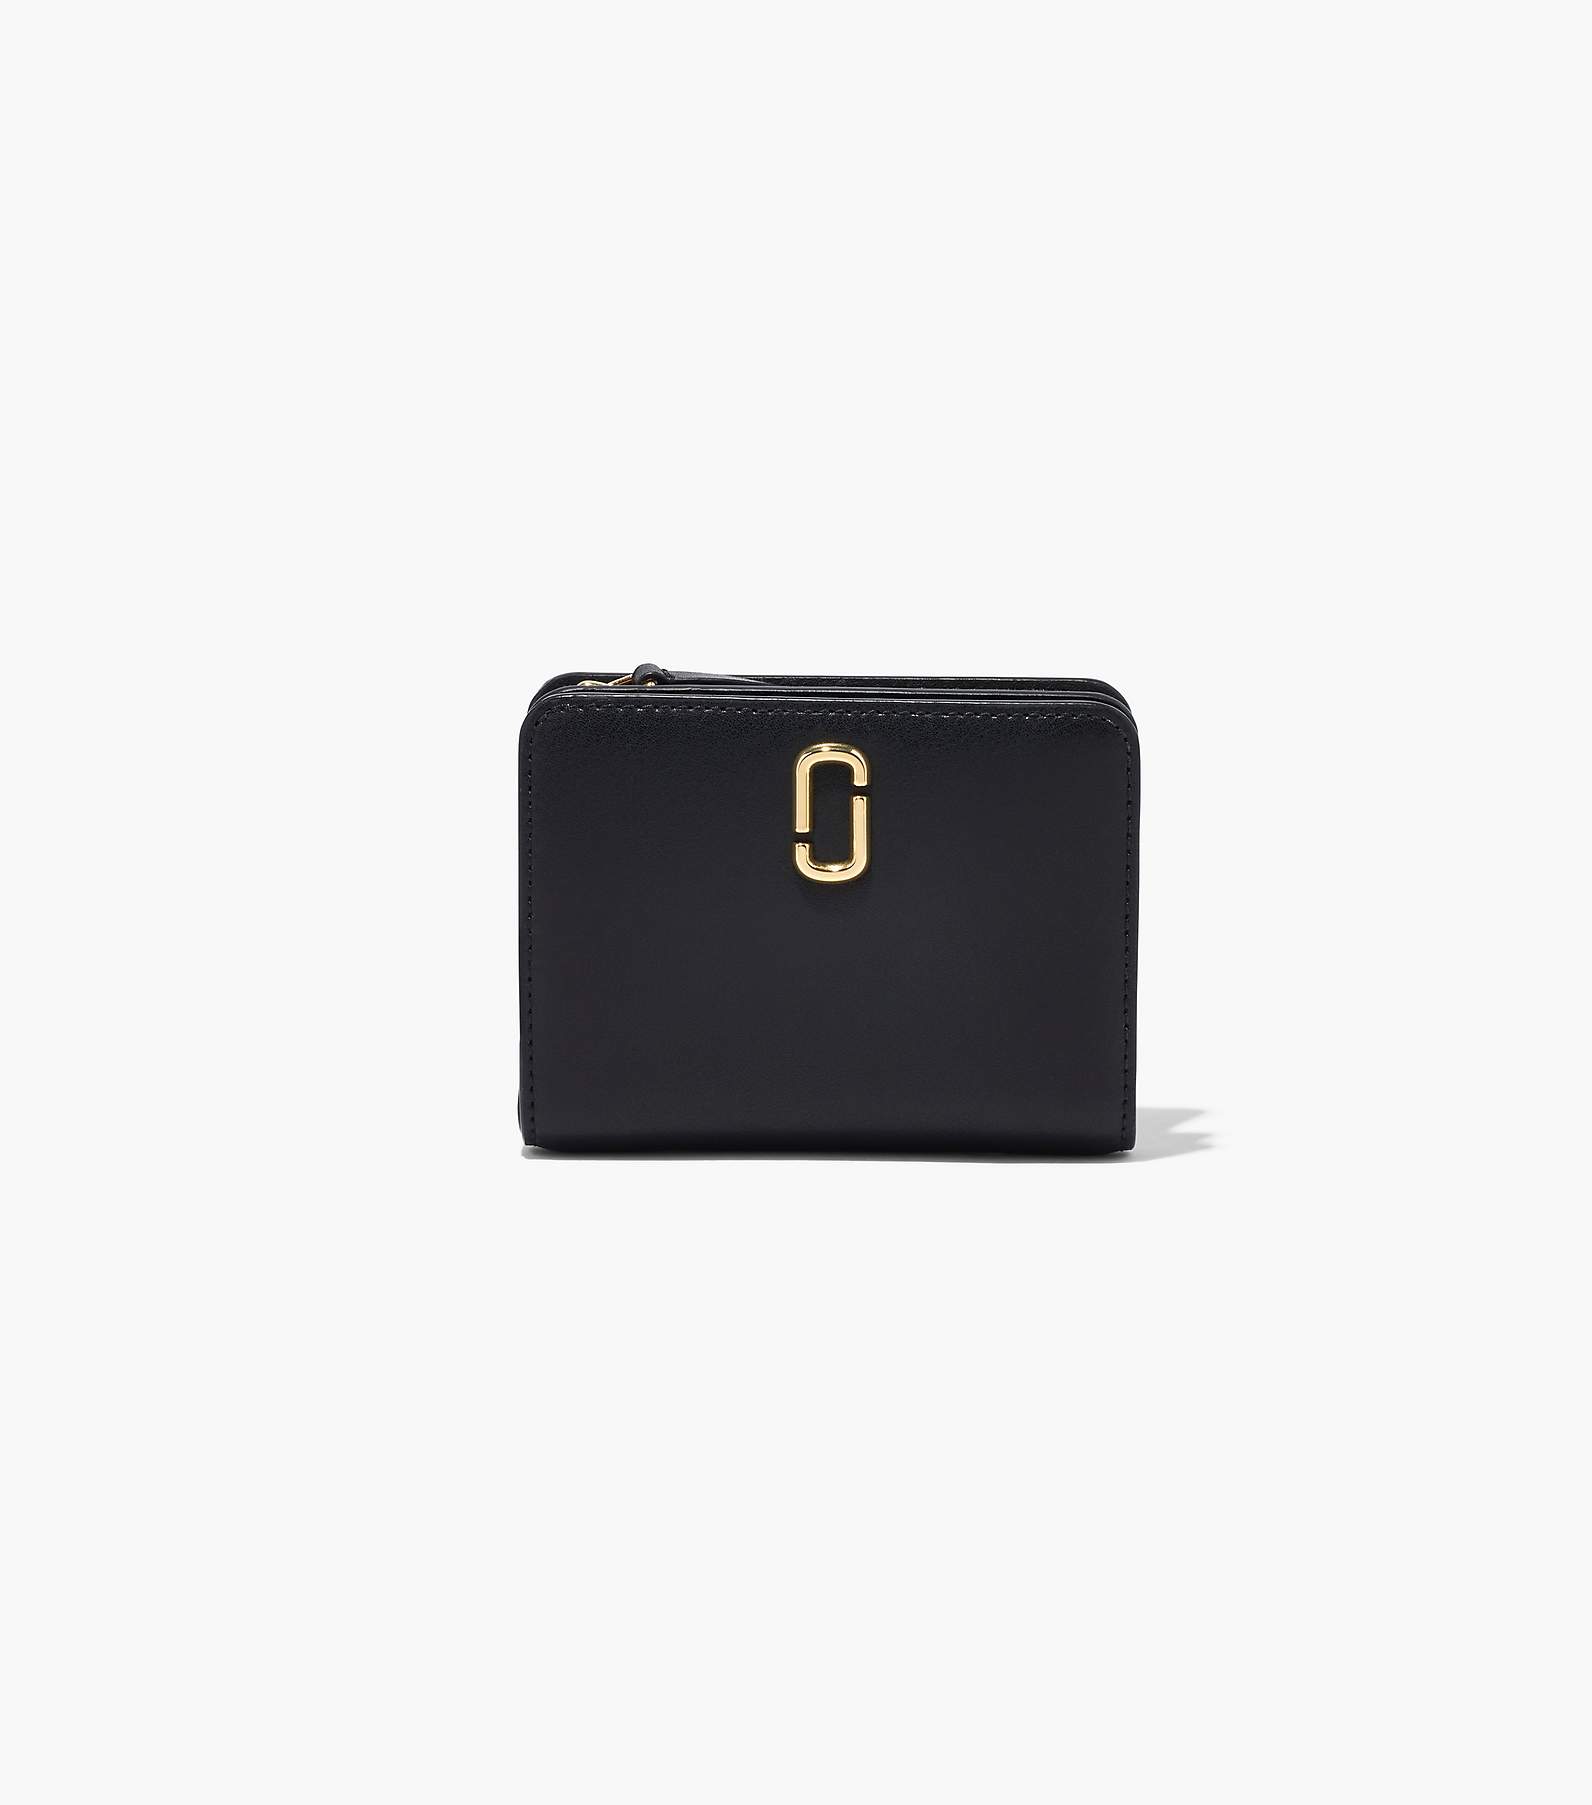 Marc Jacobs Mini The Snapshot Dtm Compact Wallet at FORZIERI